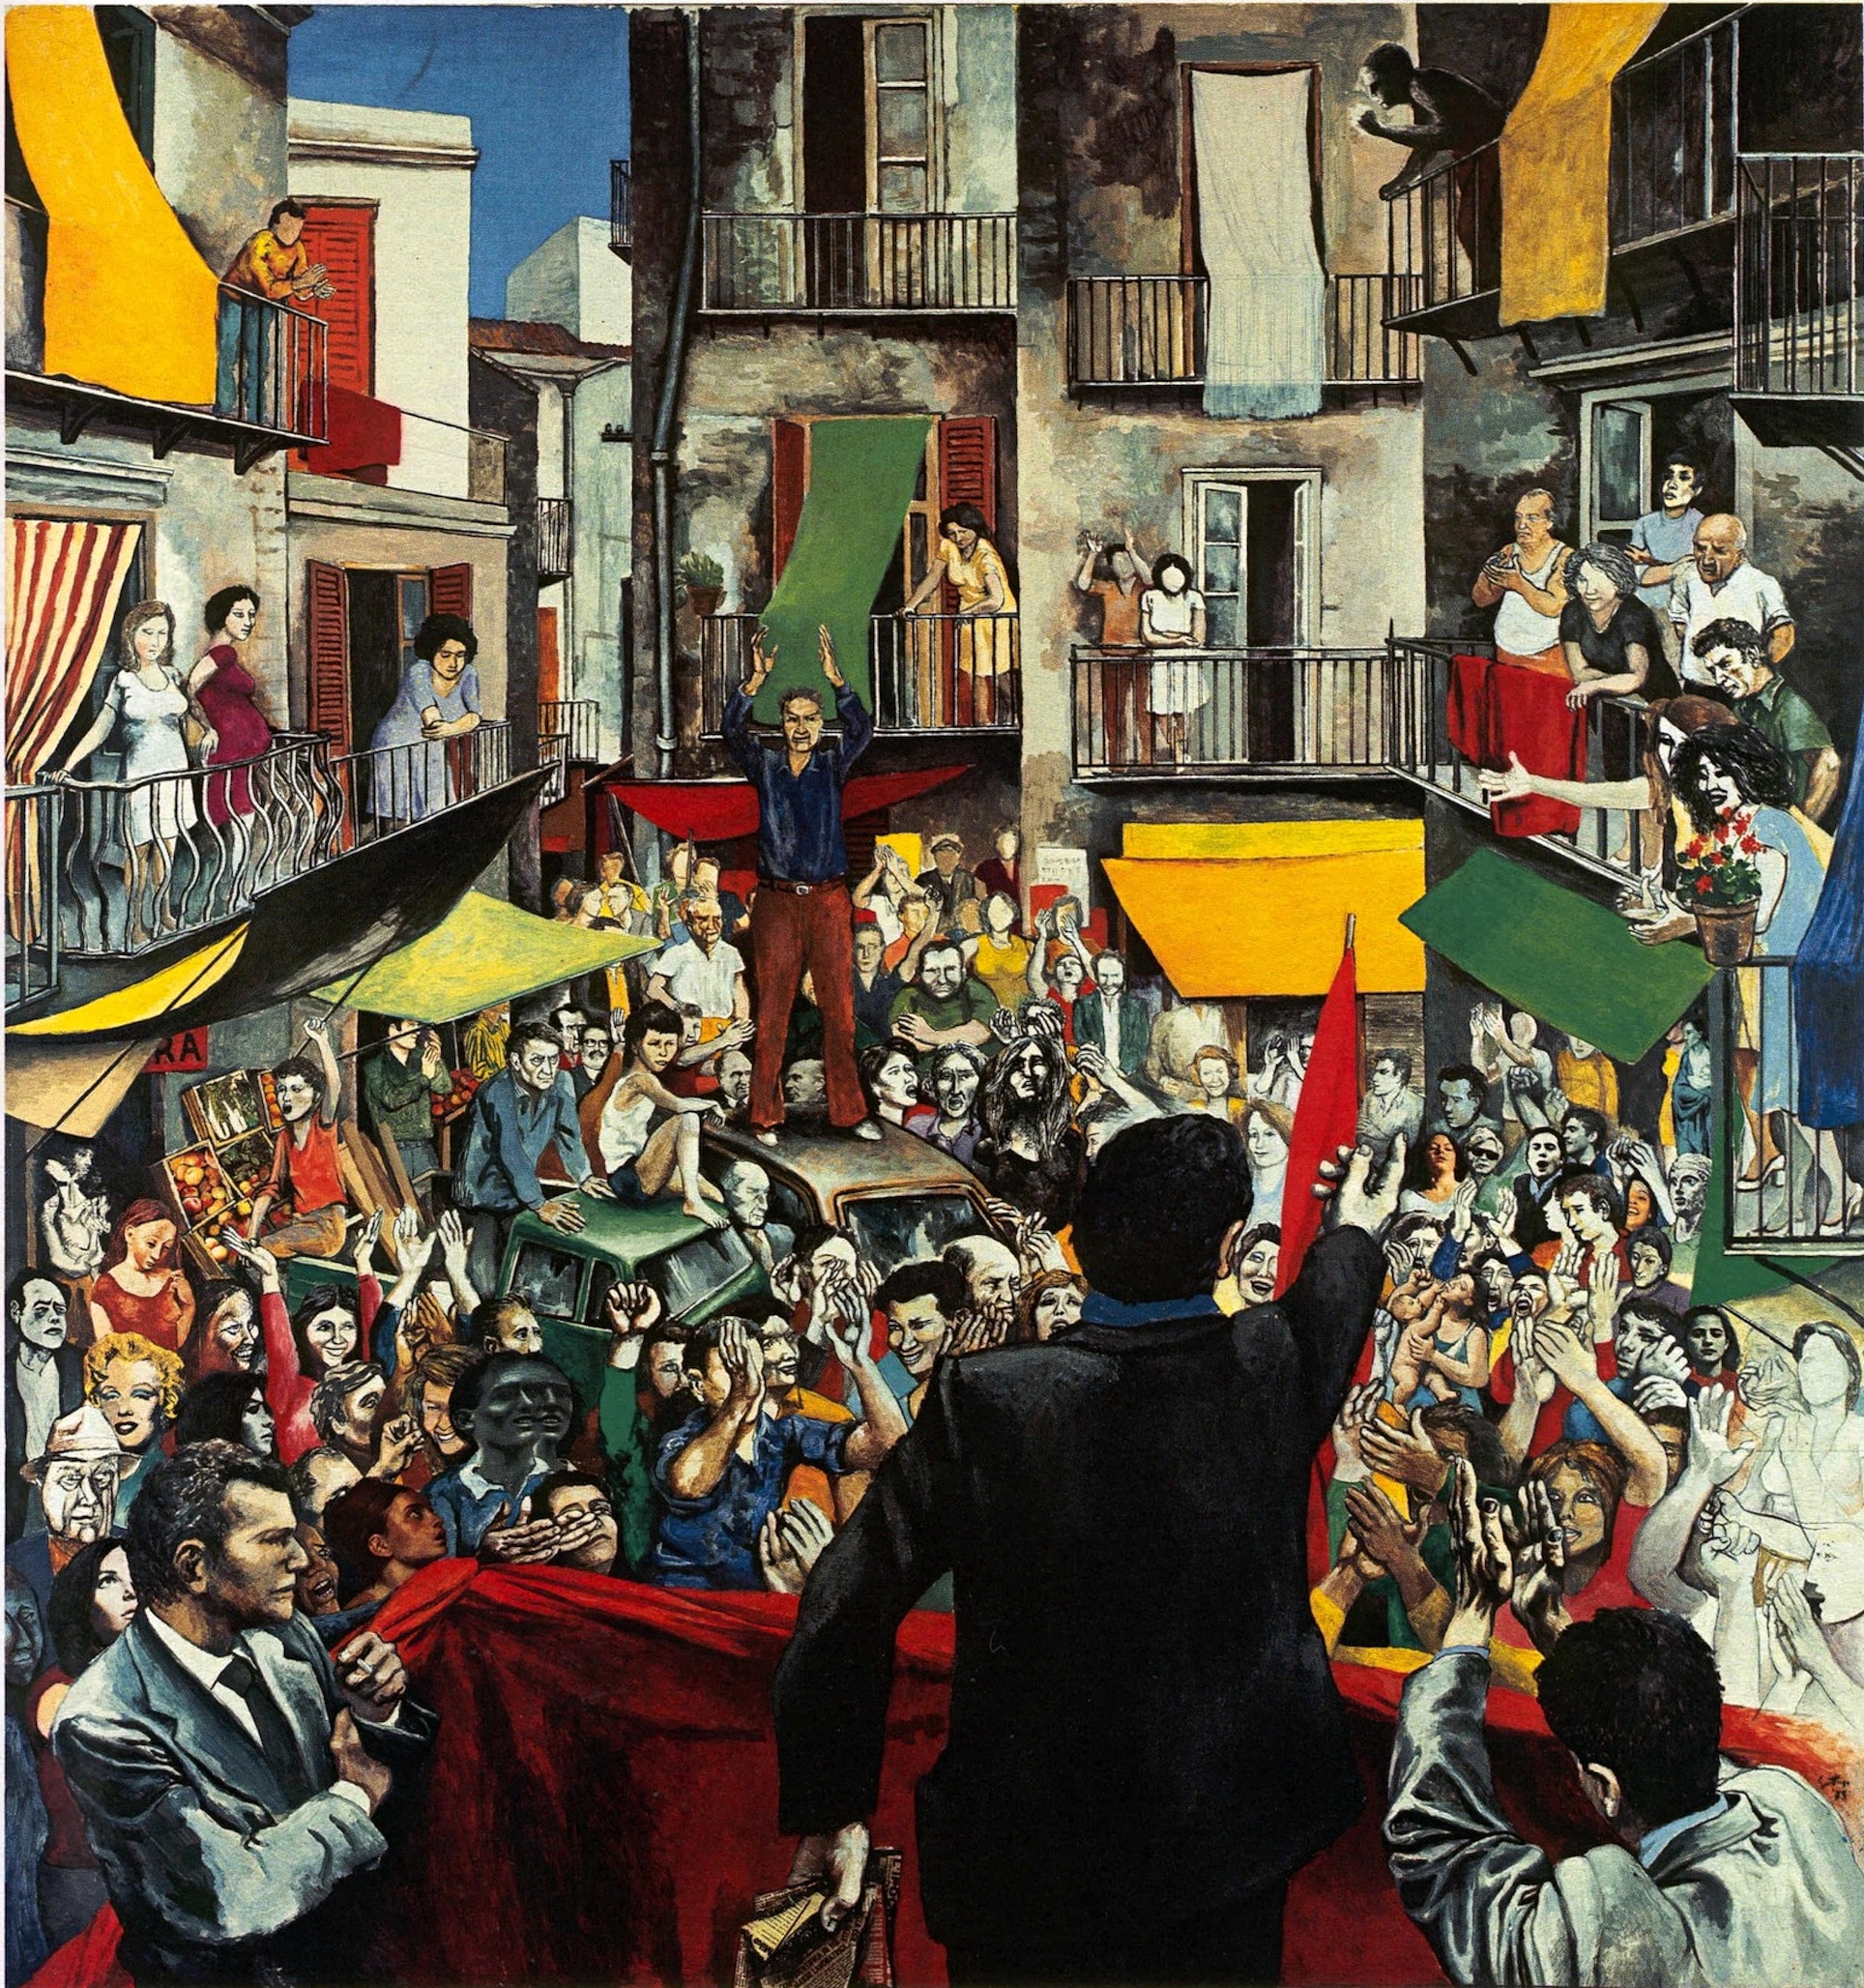 http://static.guim.co.uk/sys-images/Arts/Arts_/Pictures/2015/1/12/1421074398026/Renato-Guttuso-001.jpg